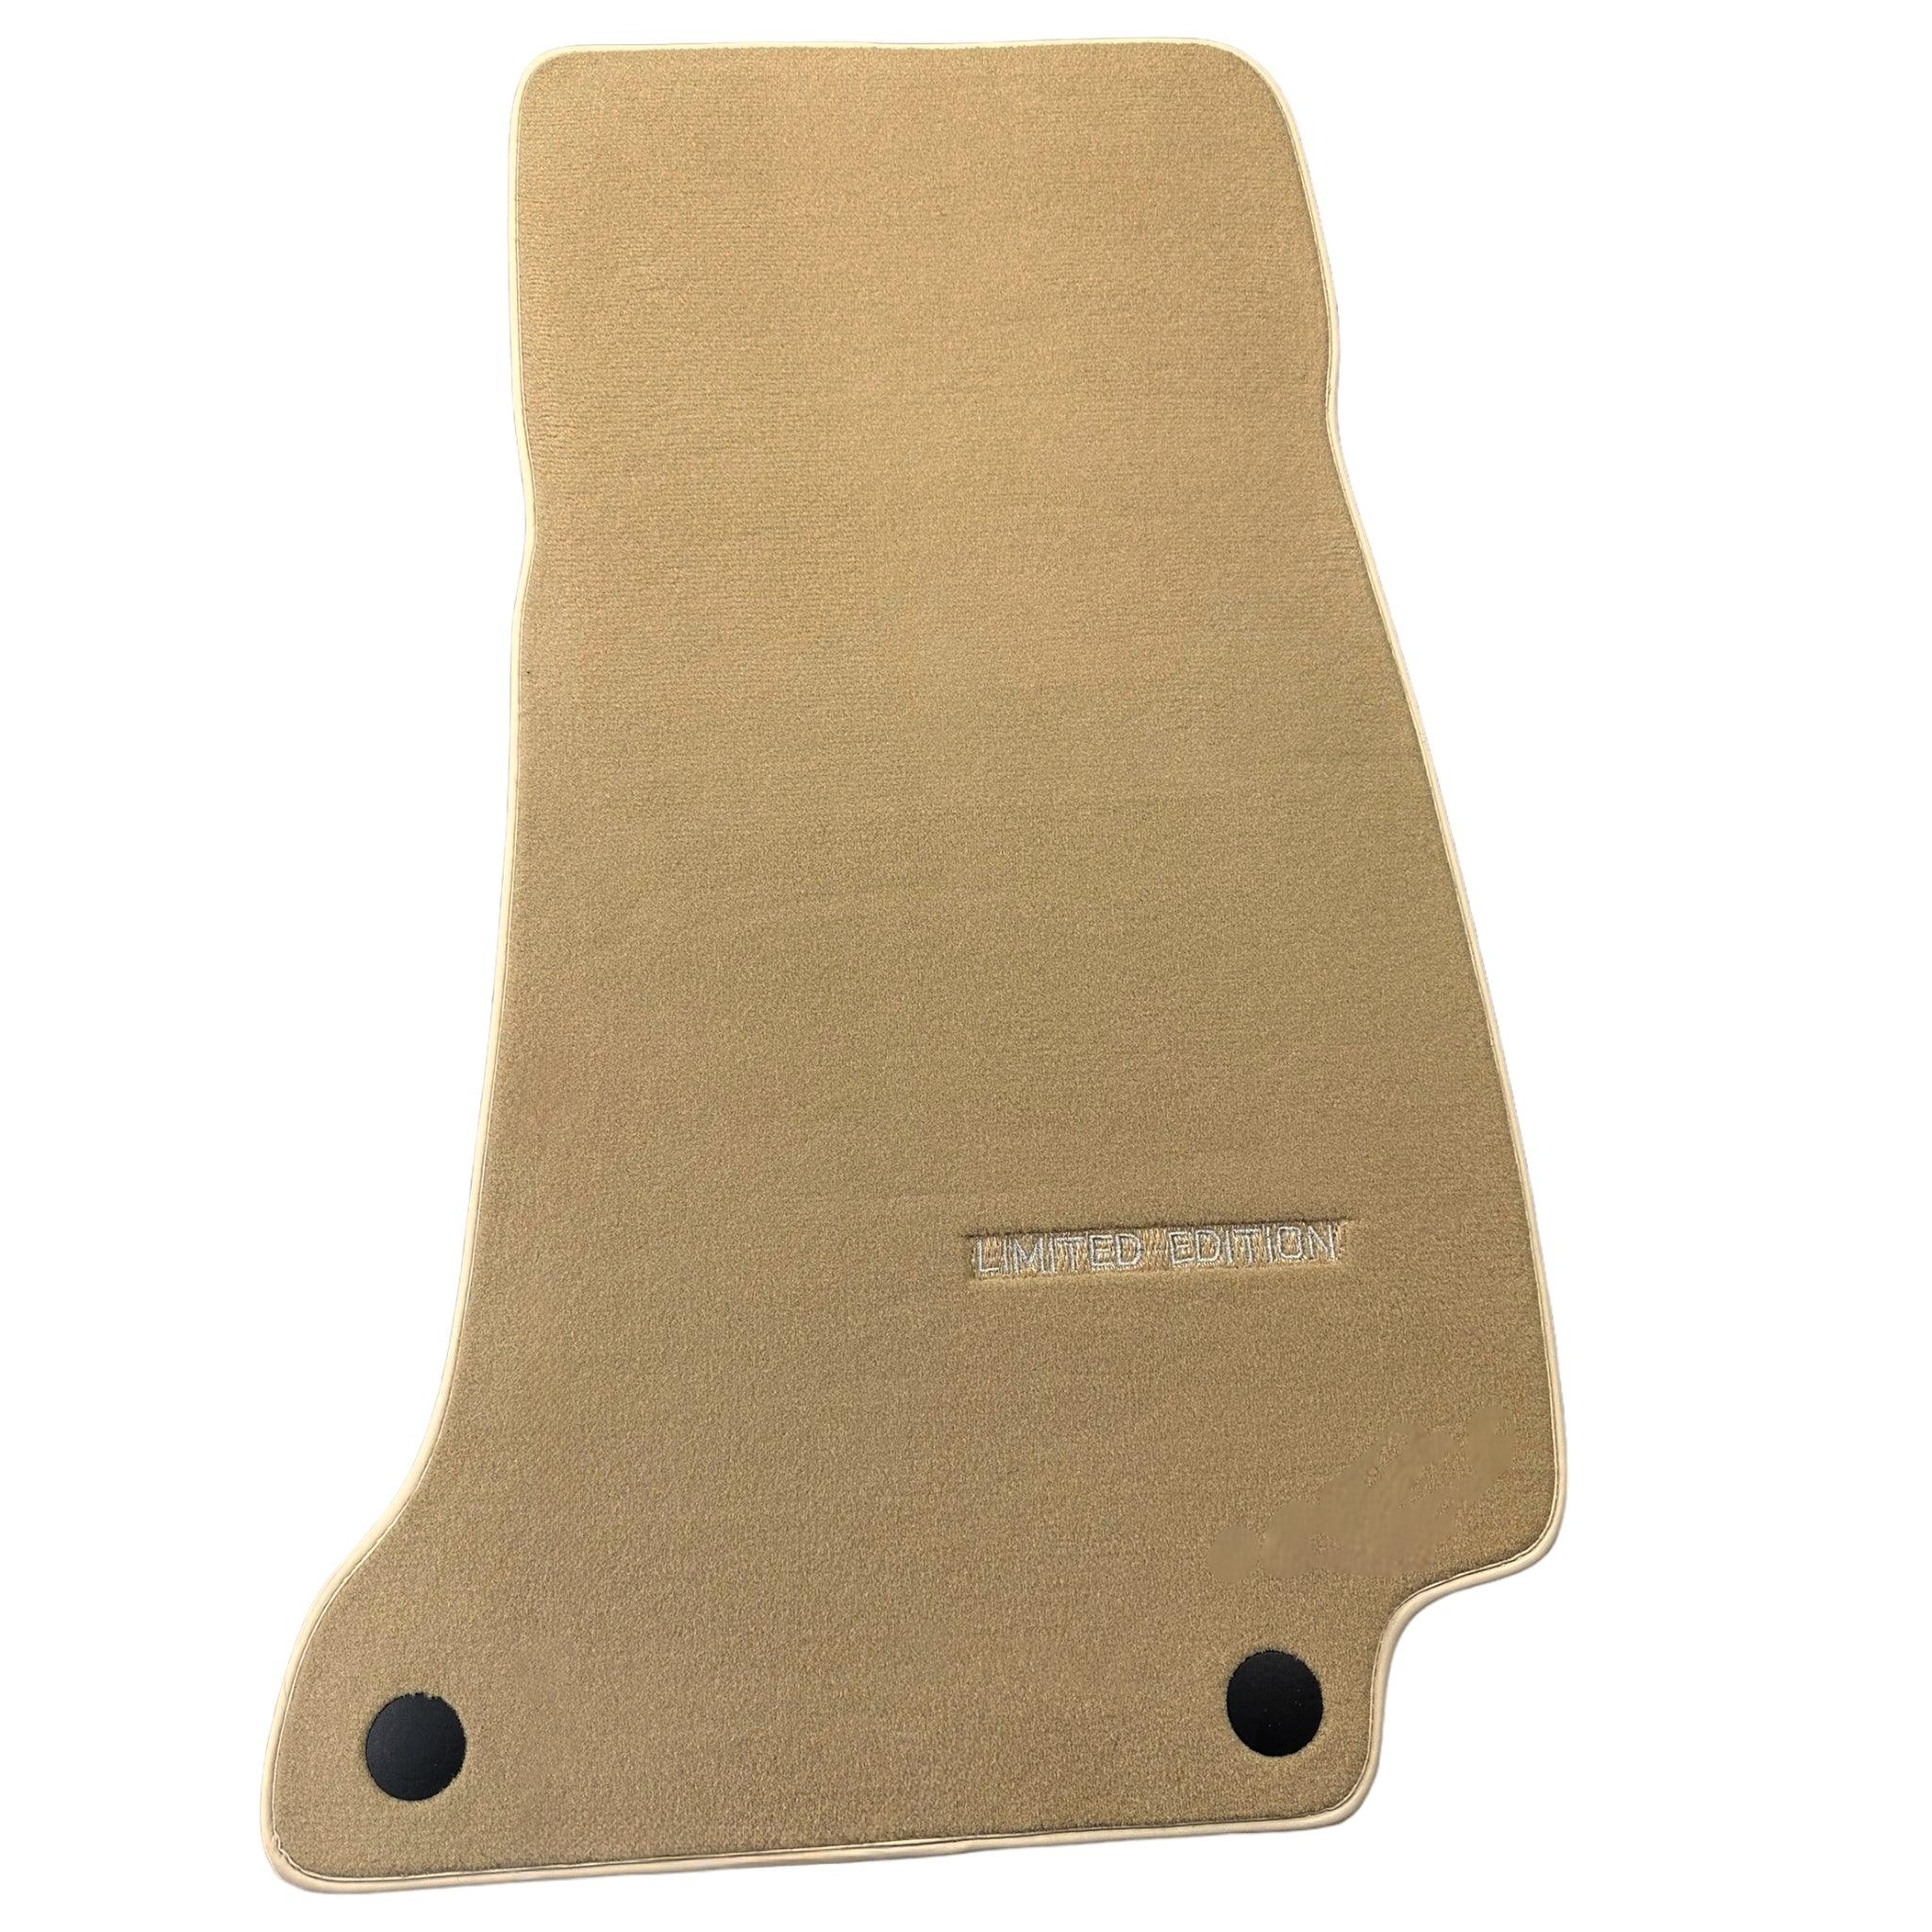 Beige Floor Mats For Mercedes Benz EQC-Class N293 (2019-2023) | Limited Edition